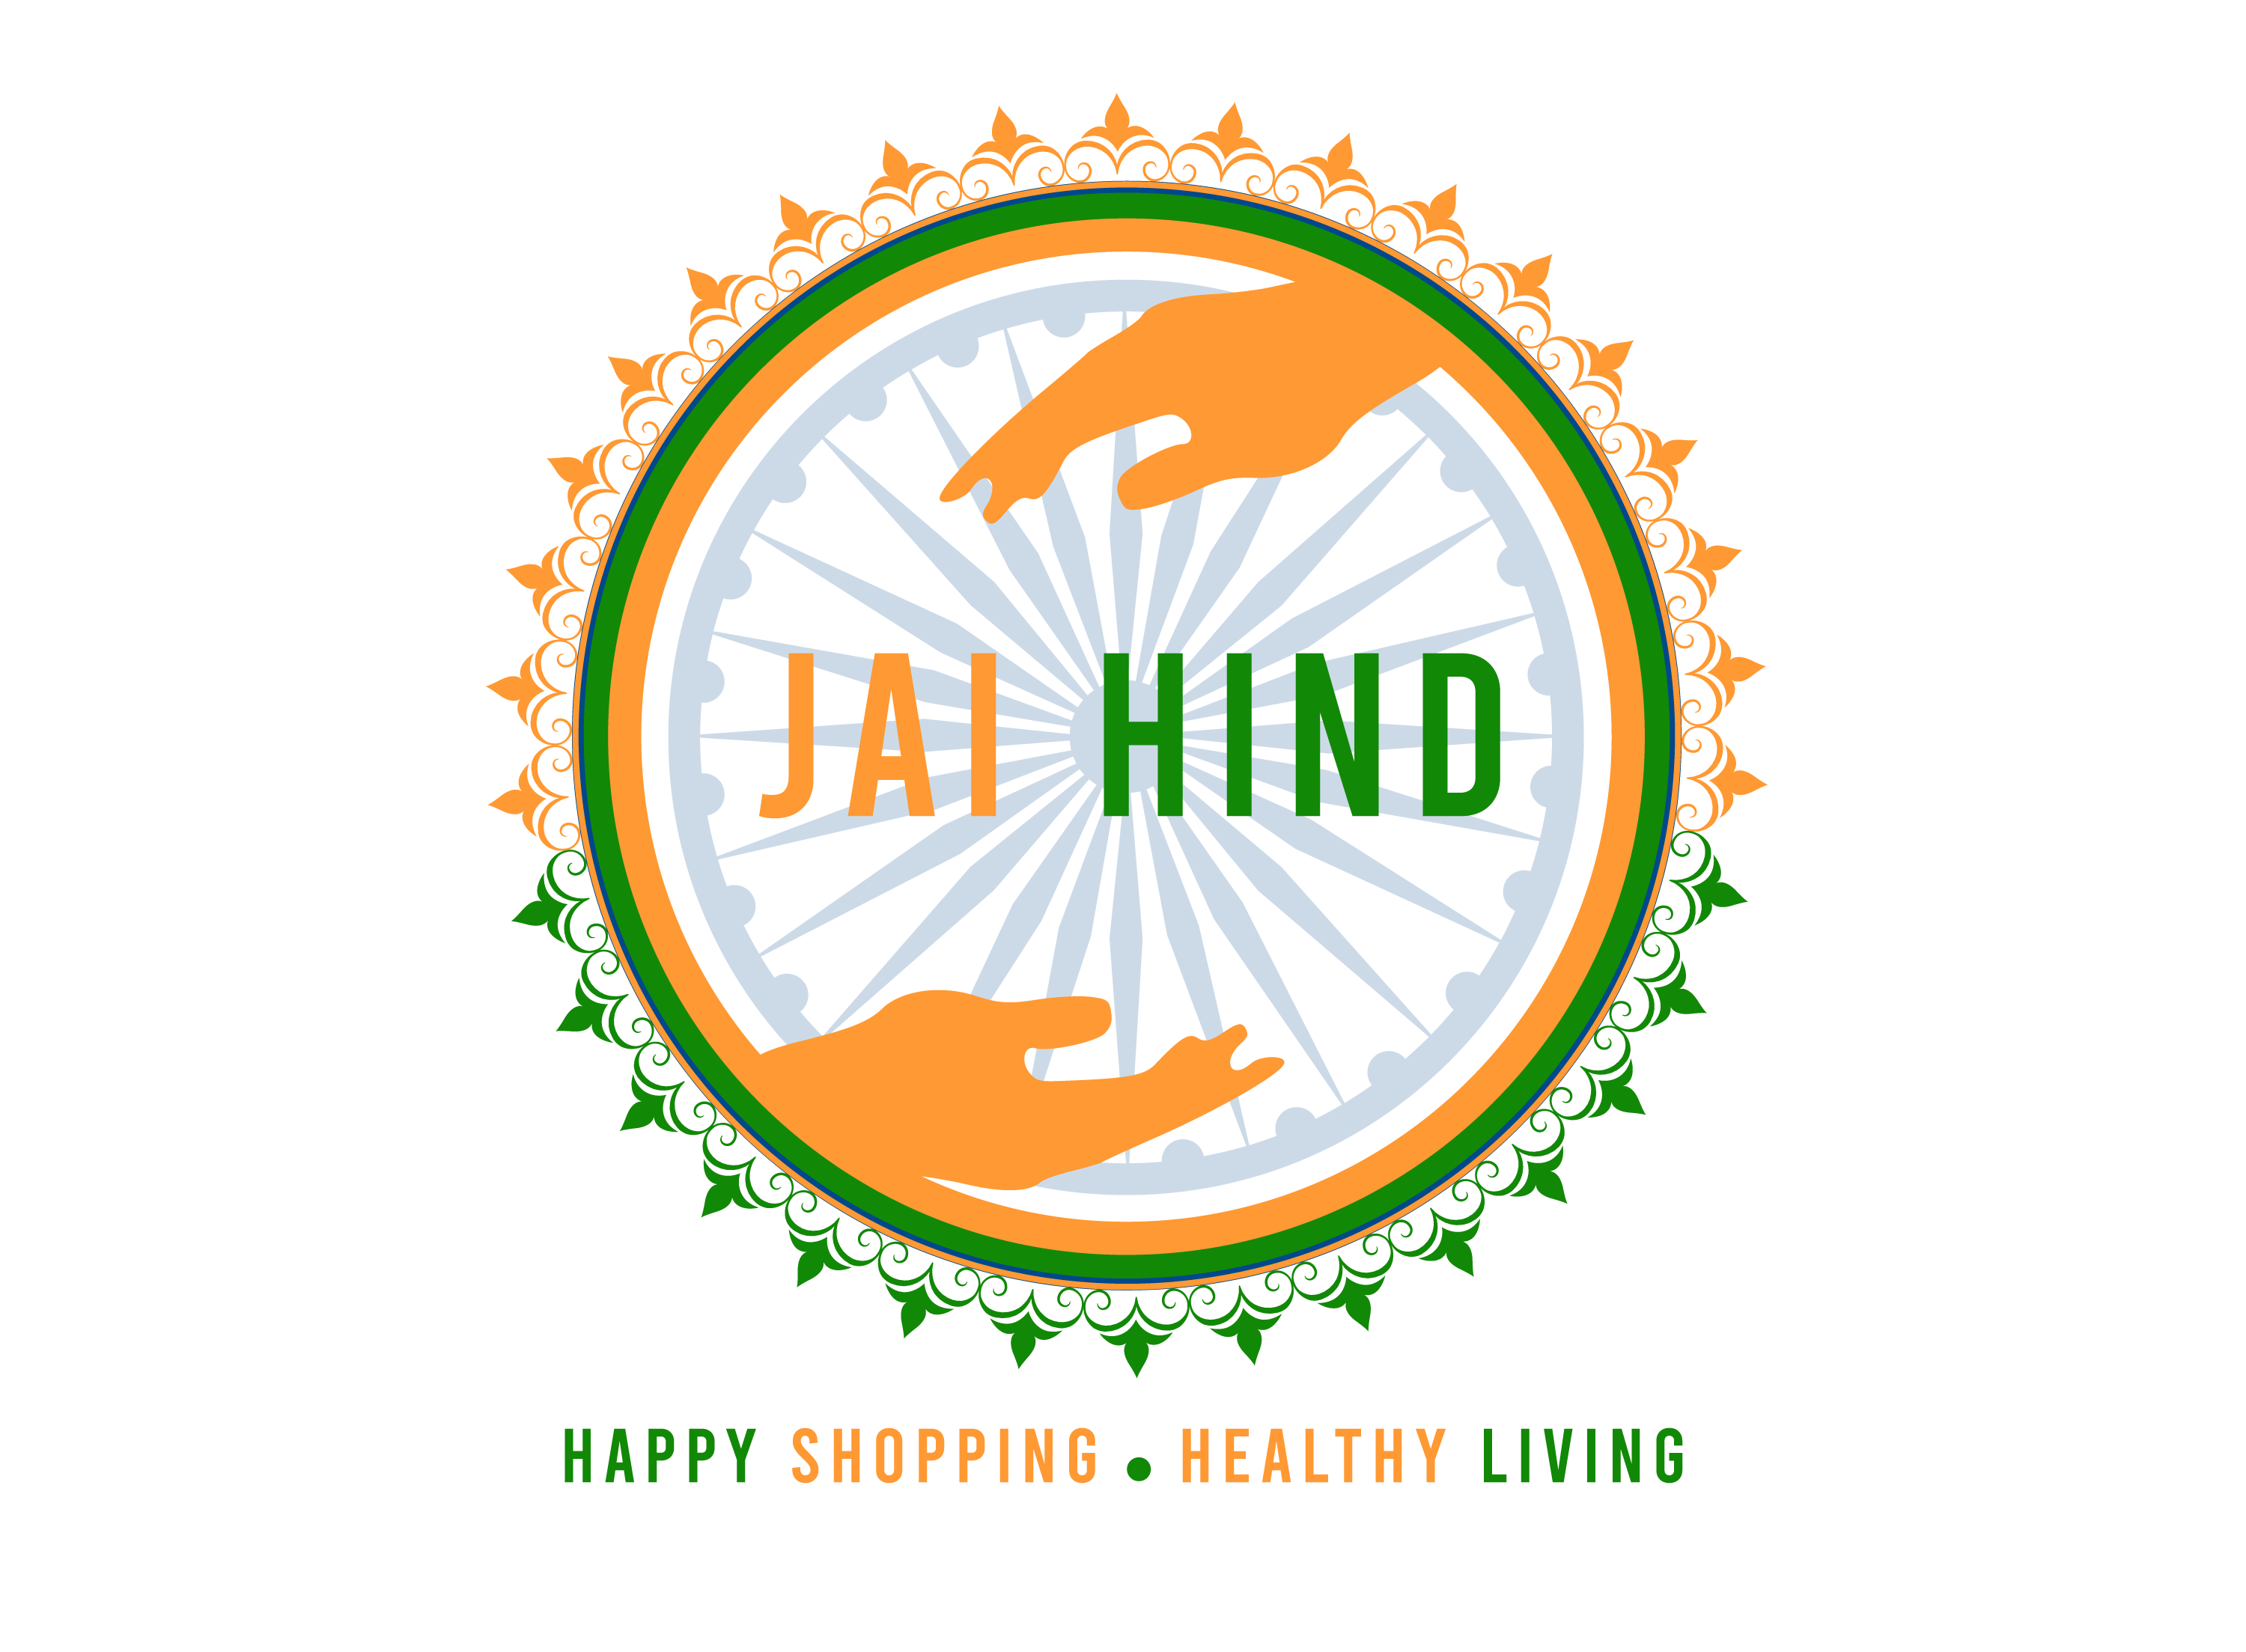 terms-conditions-jai-hind-grocery